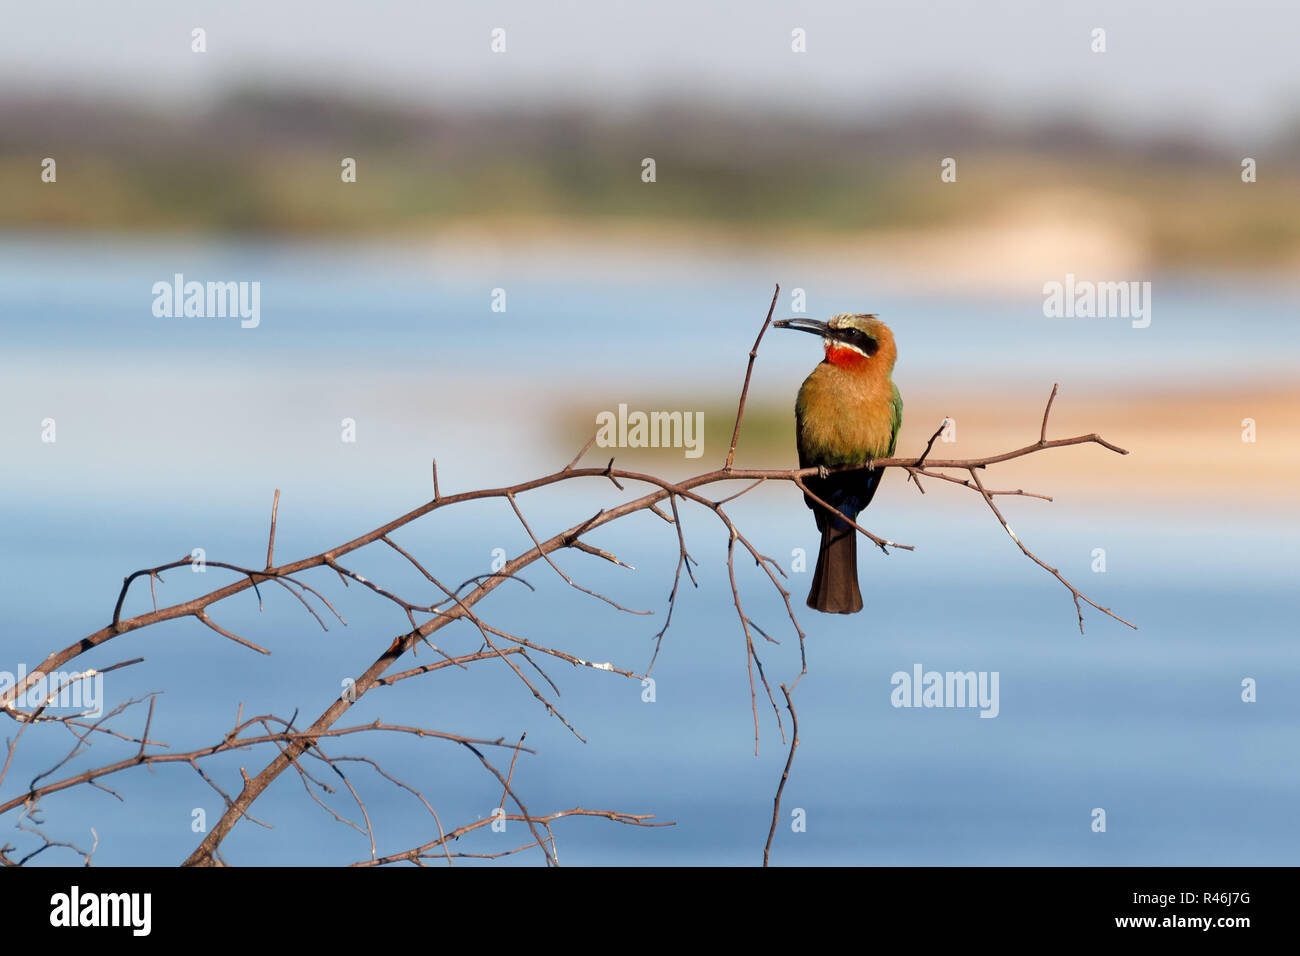 White fronted Bee-eater am Baum Stockfoto